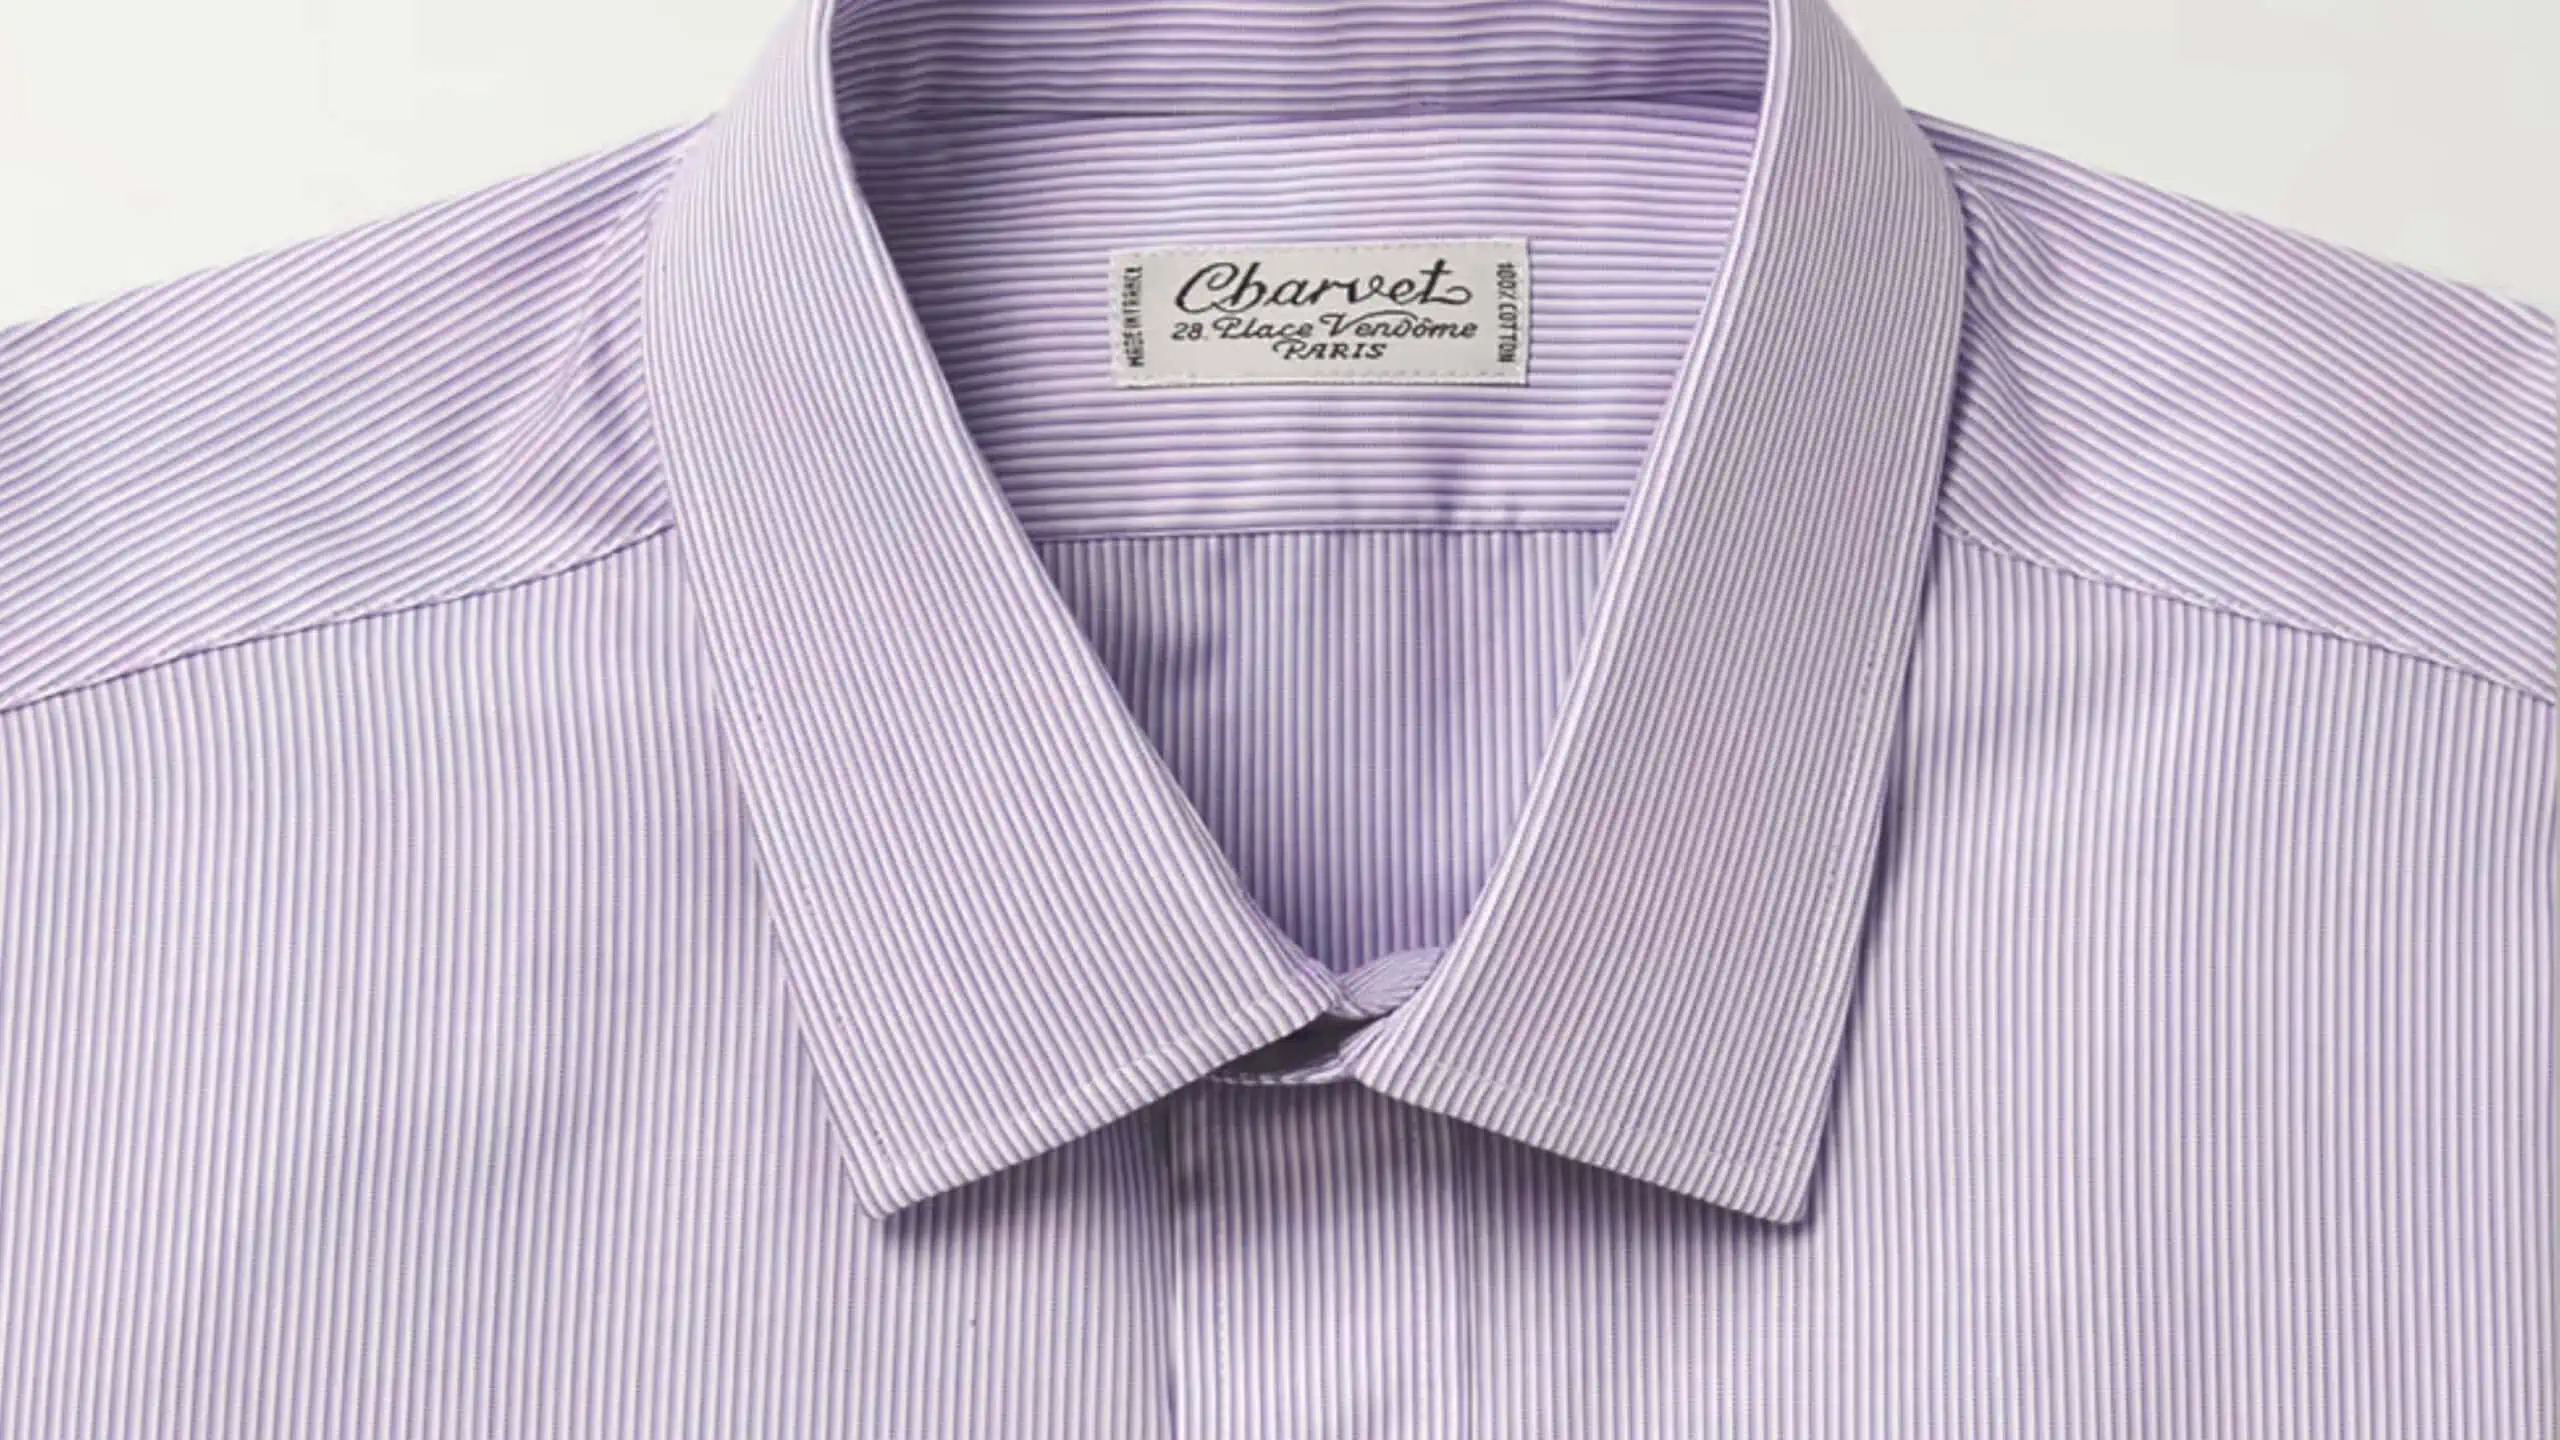 Charvet makes nice RTW shirts, but they cost a bundle!